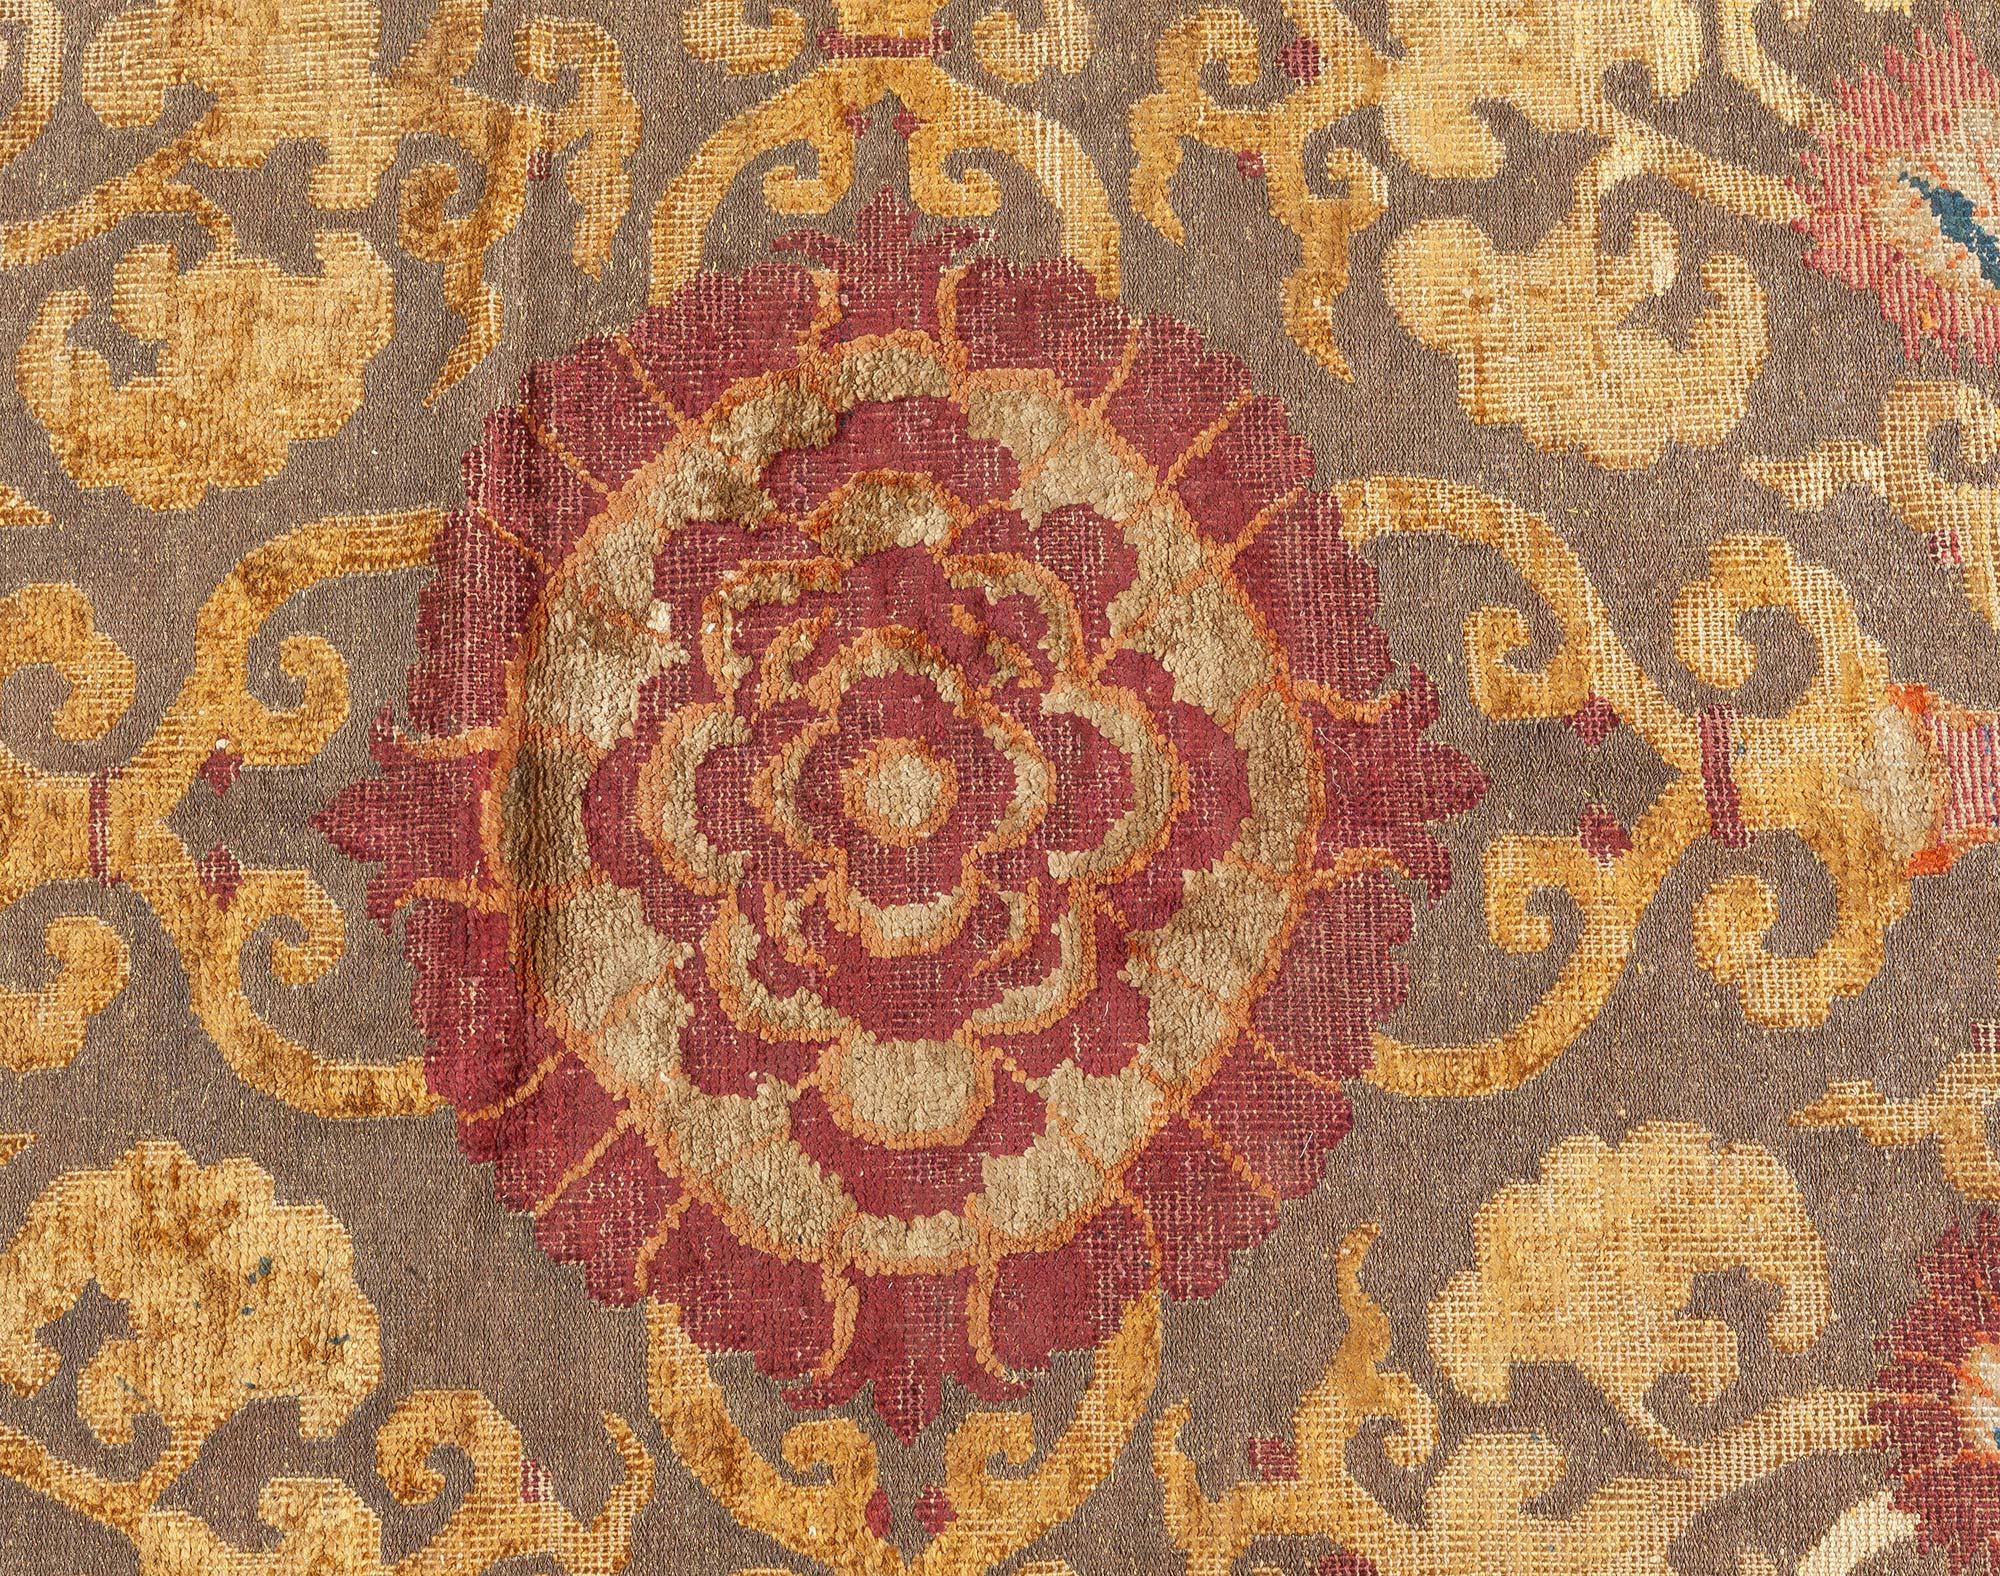 19th century Chinese floral metal and silk Thread rug
Size: 5'0